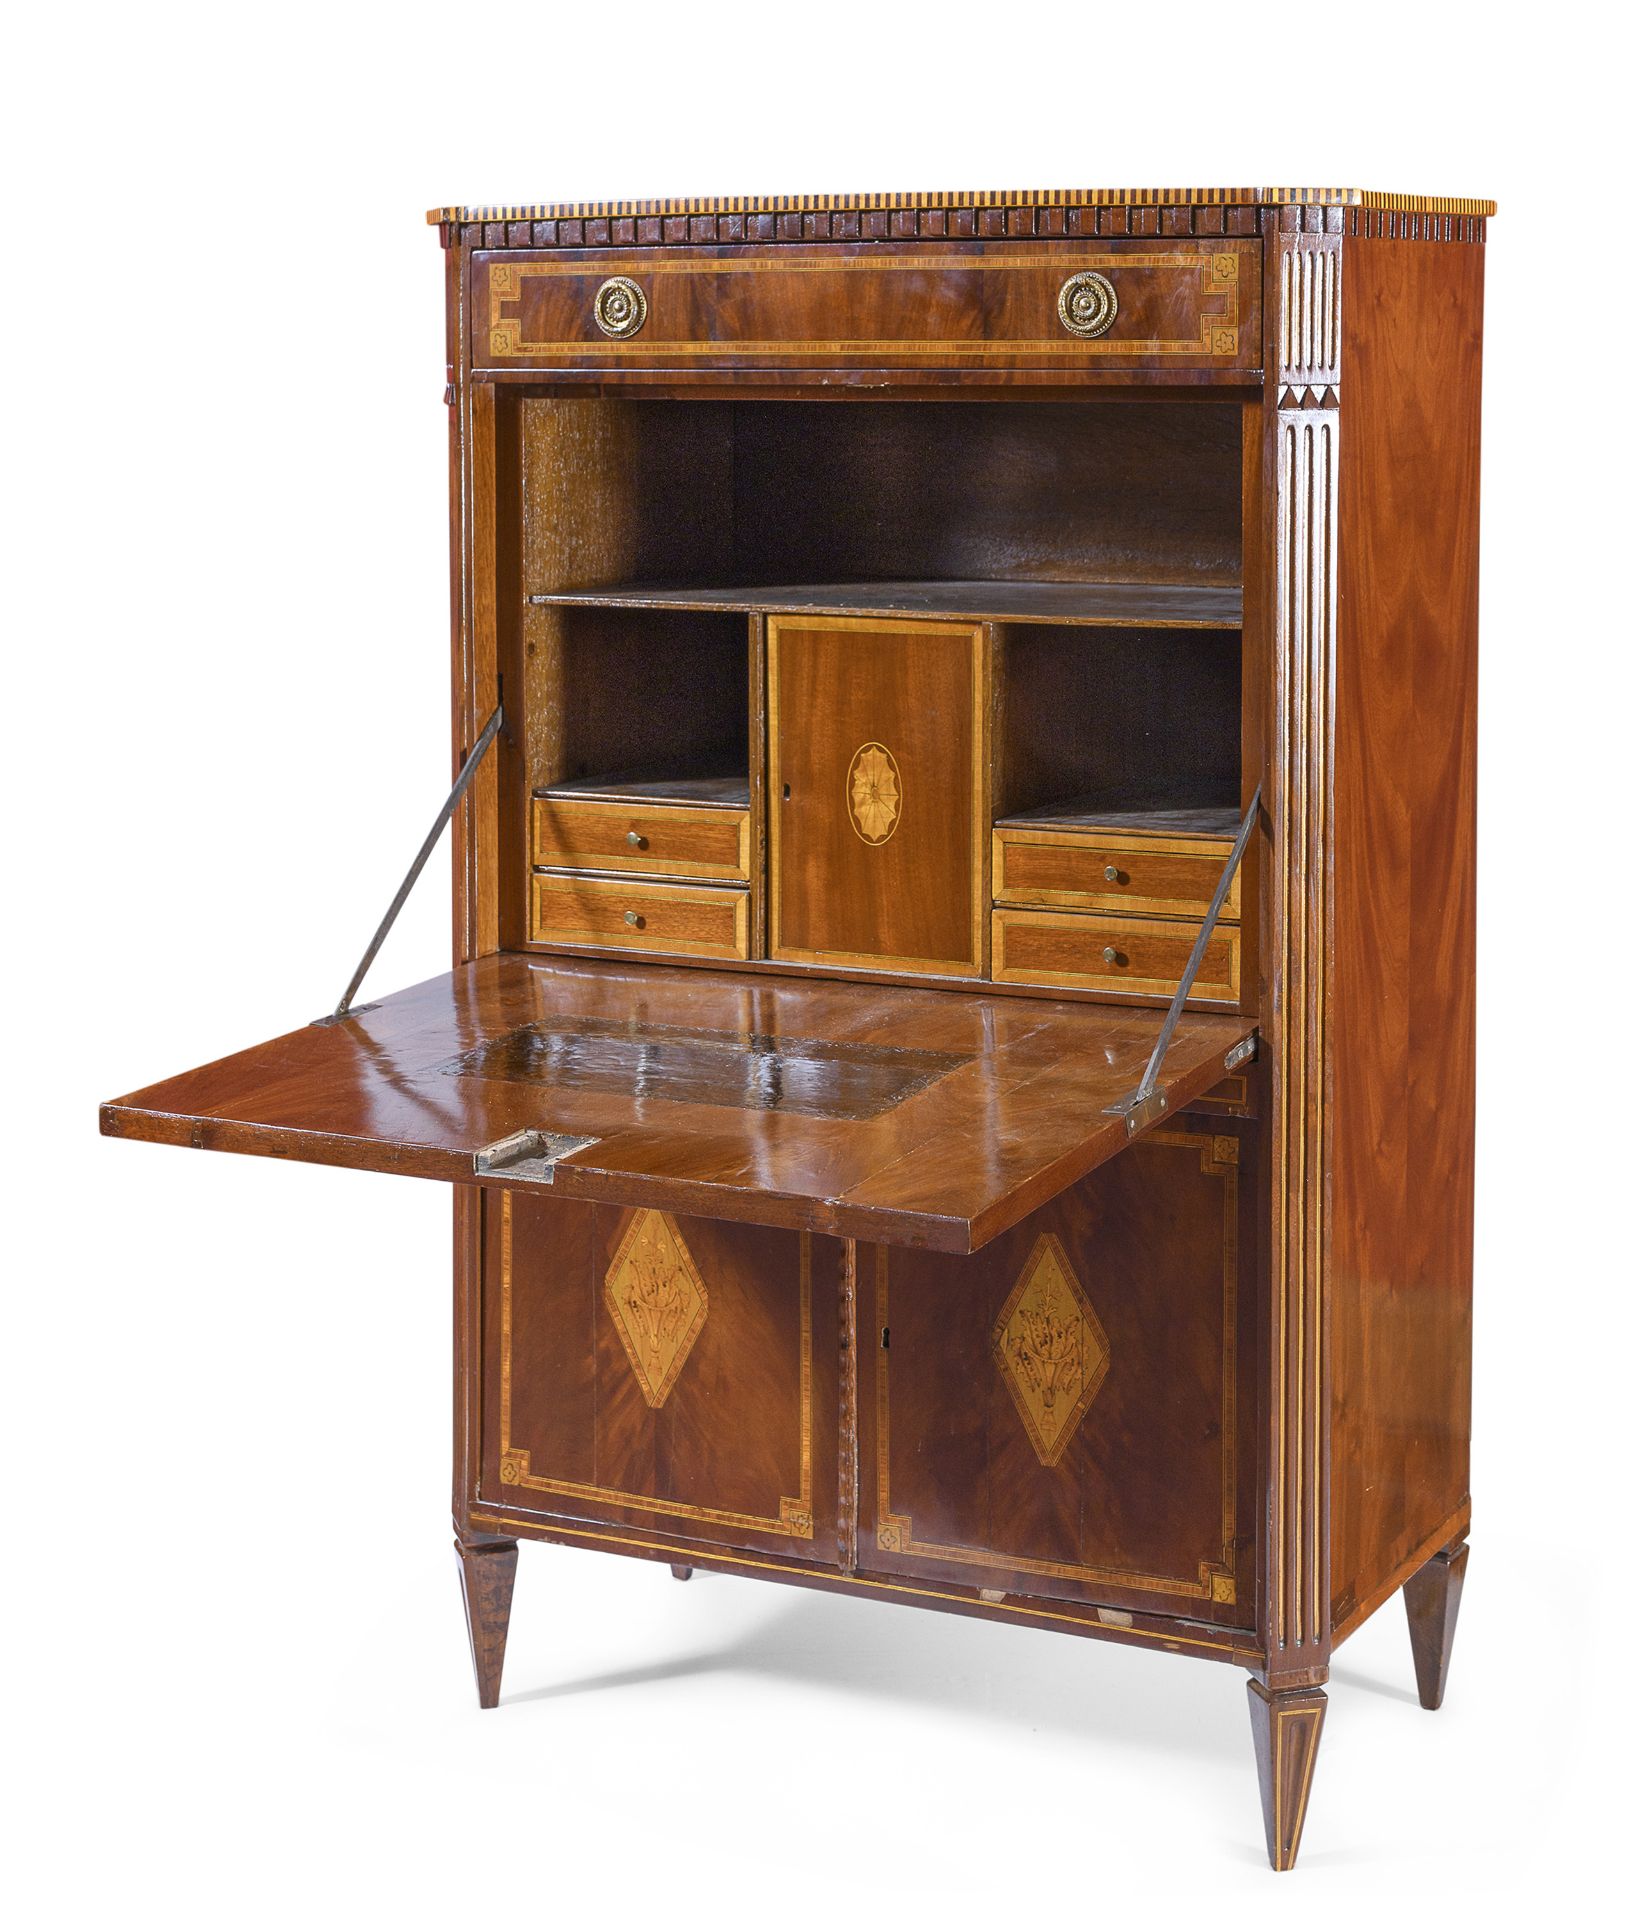 BEAUTIFUL SECRETARY IN MAHOGANY FRANCE END OF THE 18TH CENTURY - Image 2 of 2